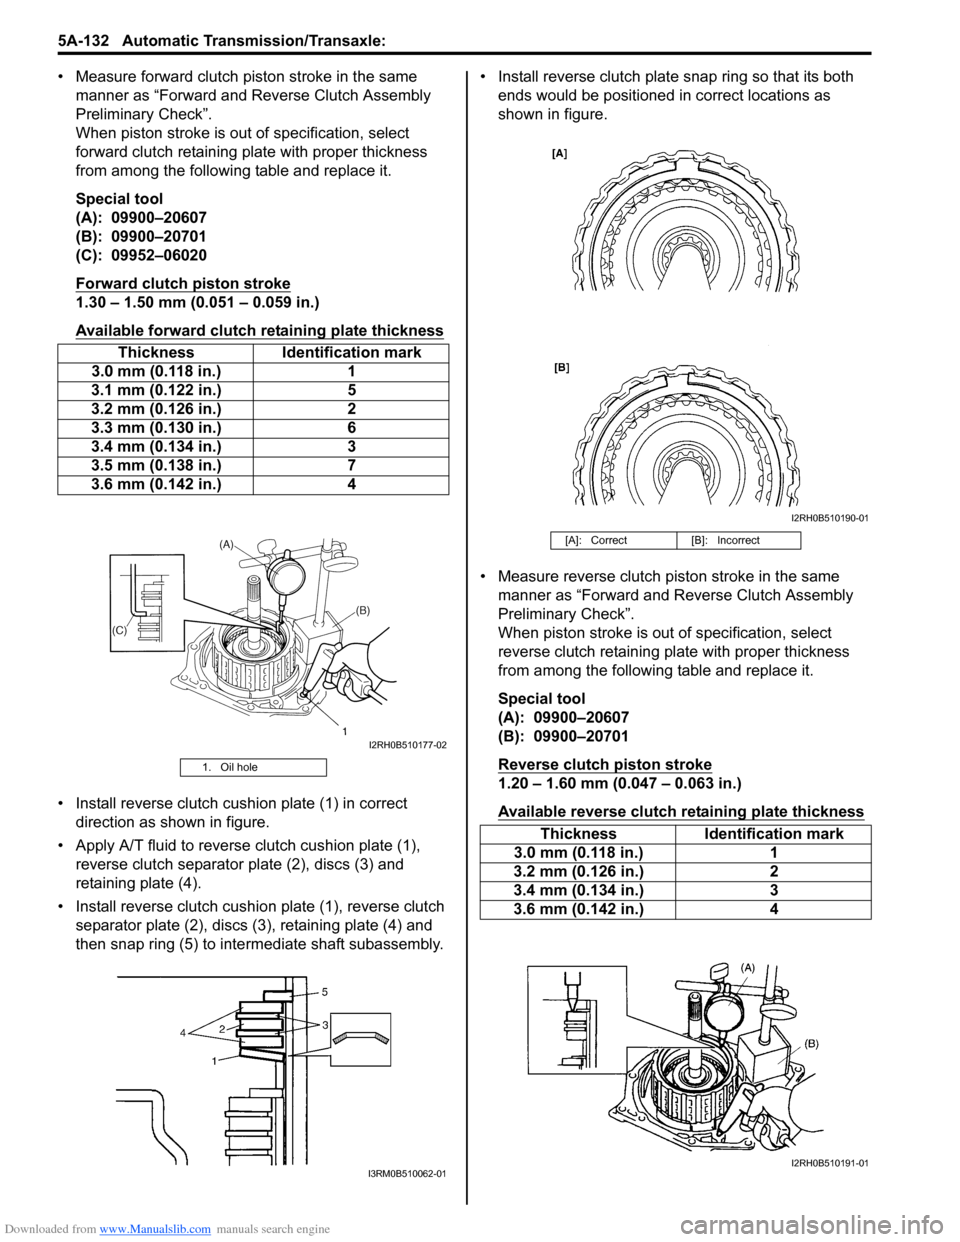 SUZUKI SWIFT 2008 2.G Service Workshop Manual Downloaded from www.Manualslib.com manuals search engine 5A-132 Automatic Transmission/Transaxle: 
• Measure forward clutch piston stroke in the same manner as “Forward and Reverse Clutch Assembly